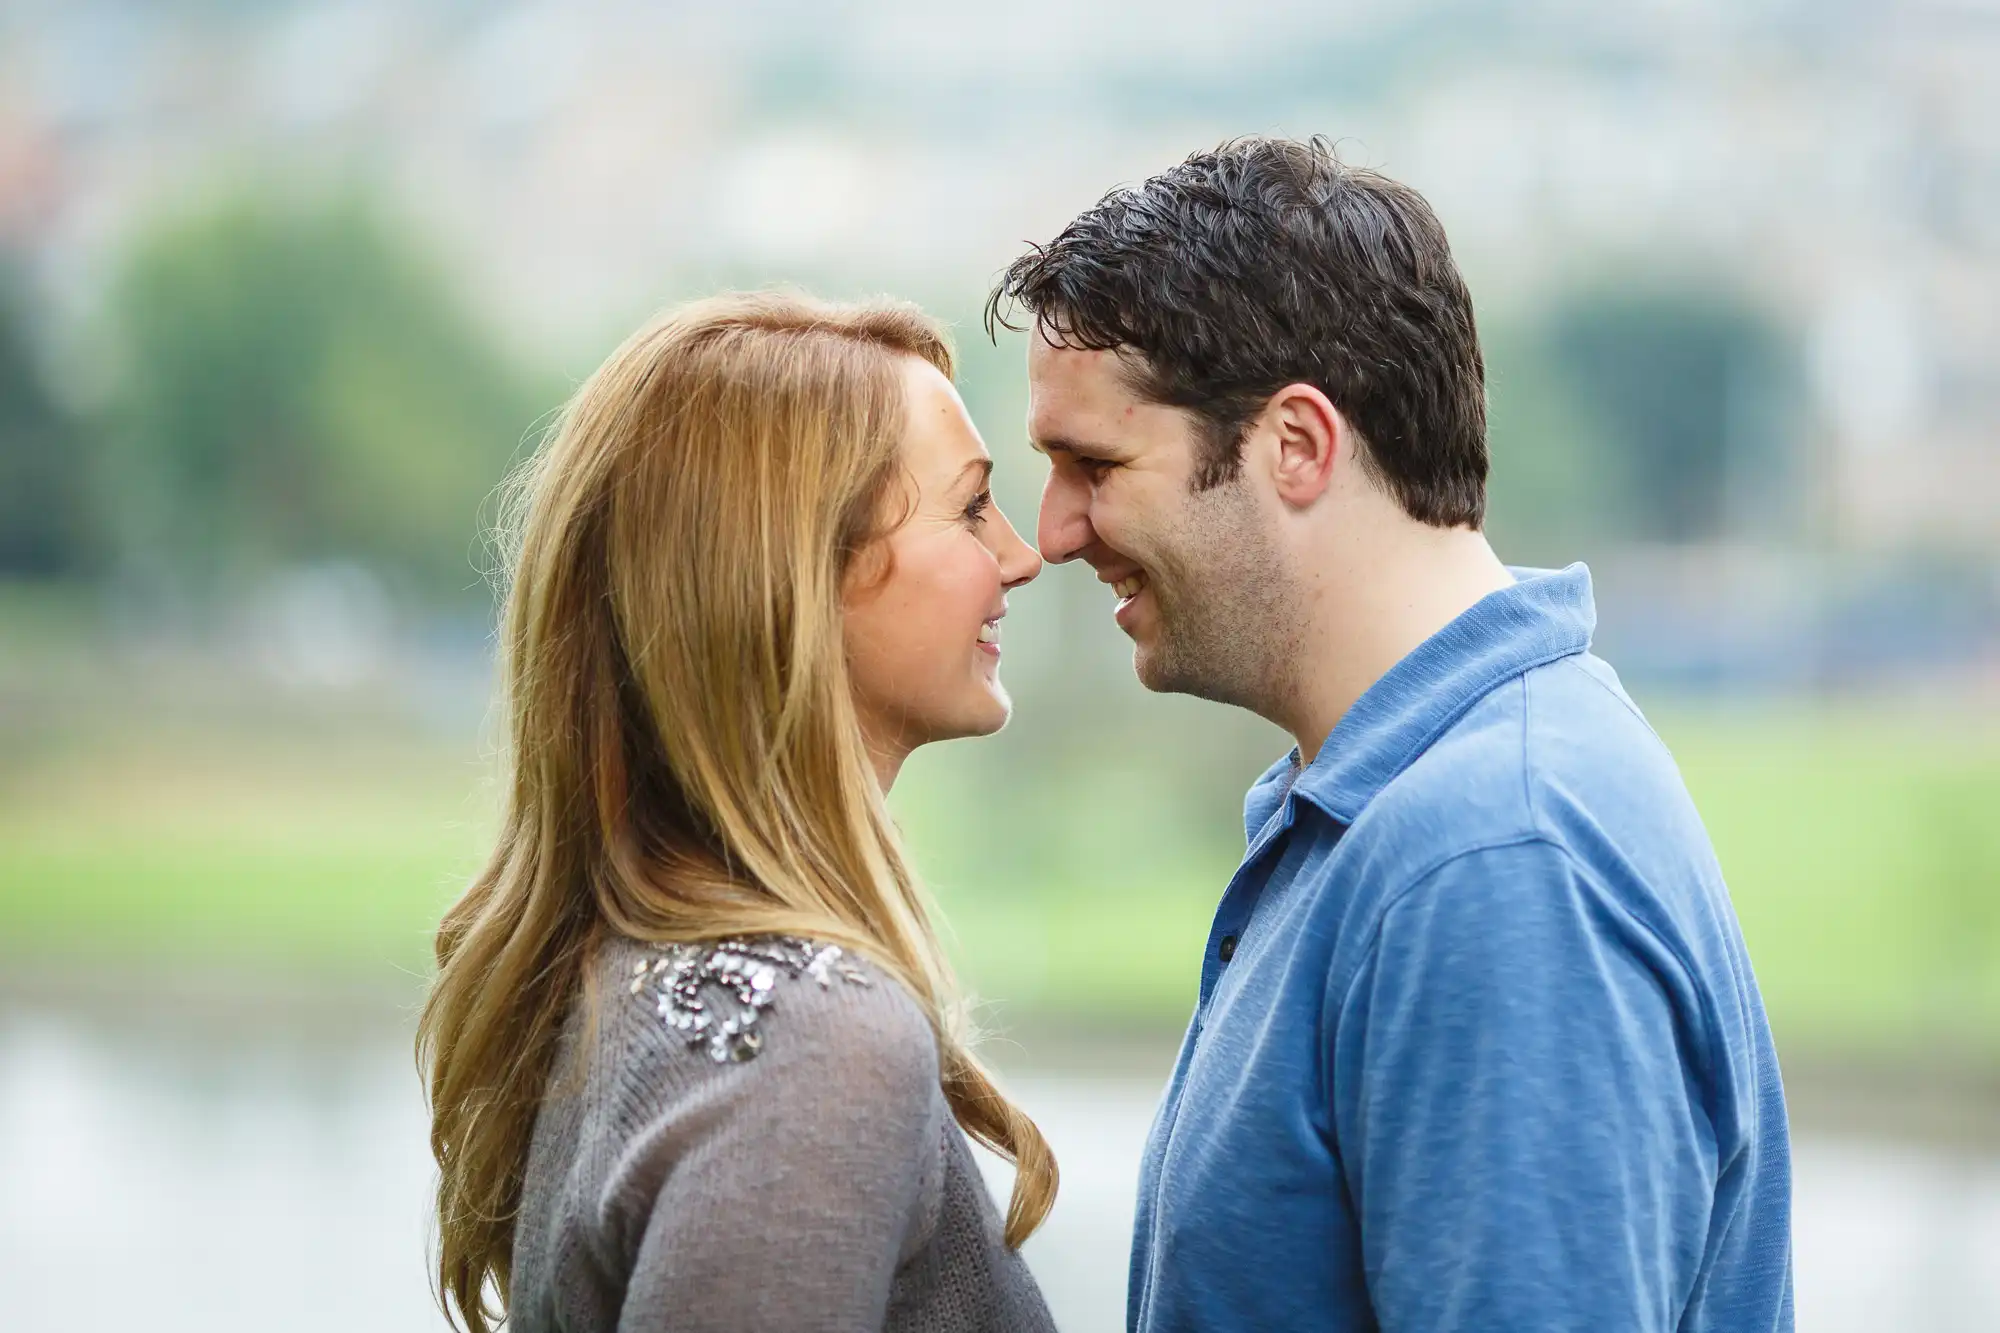 A couple standing close together, affectionately pressing their foreheads together, smiling gently with a blurred natural background.